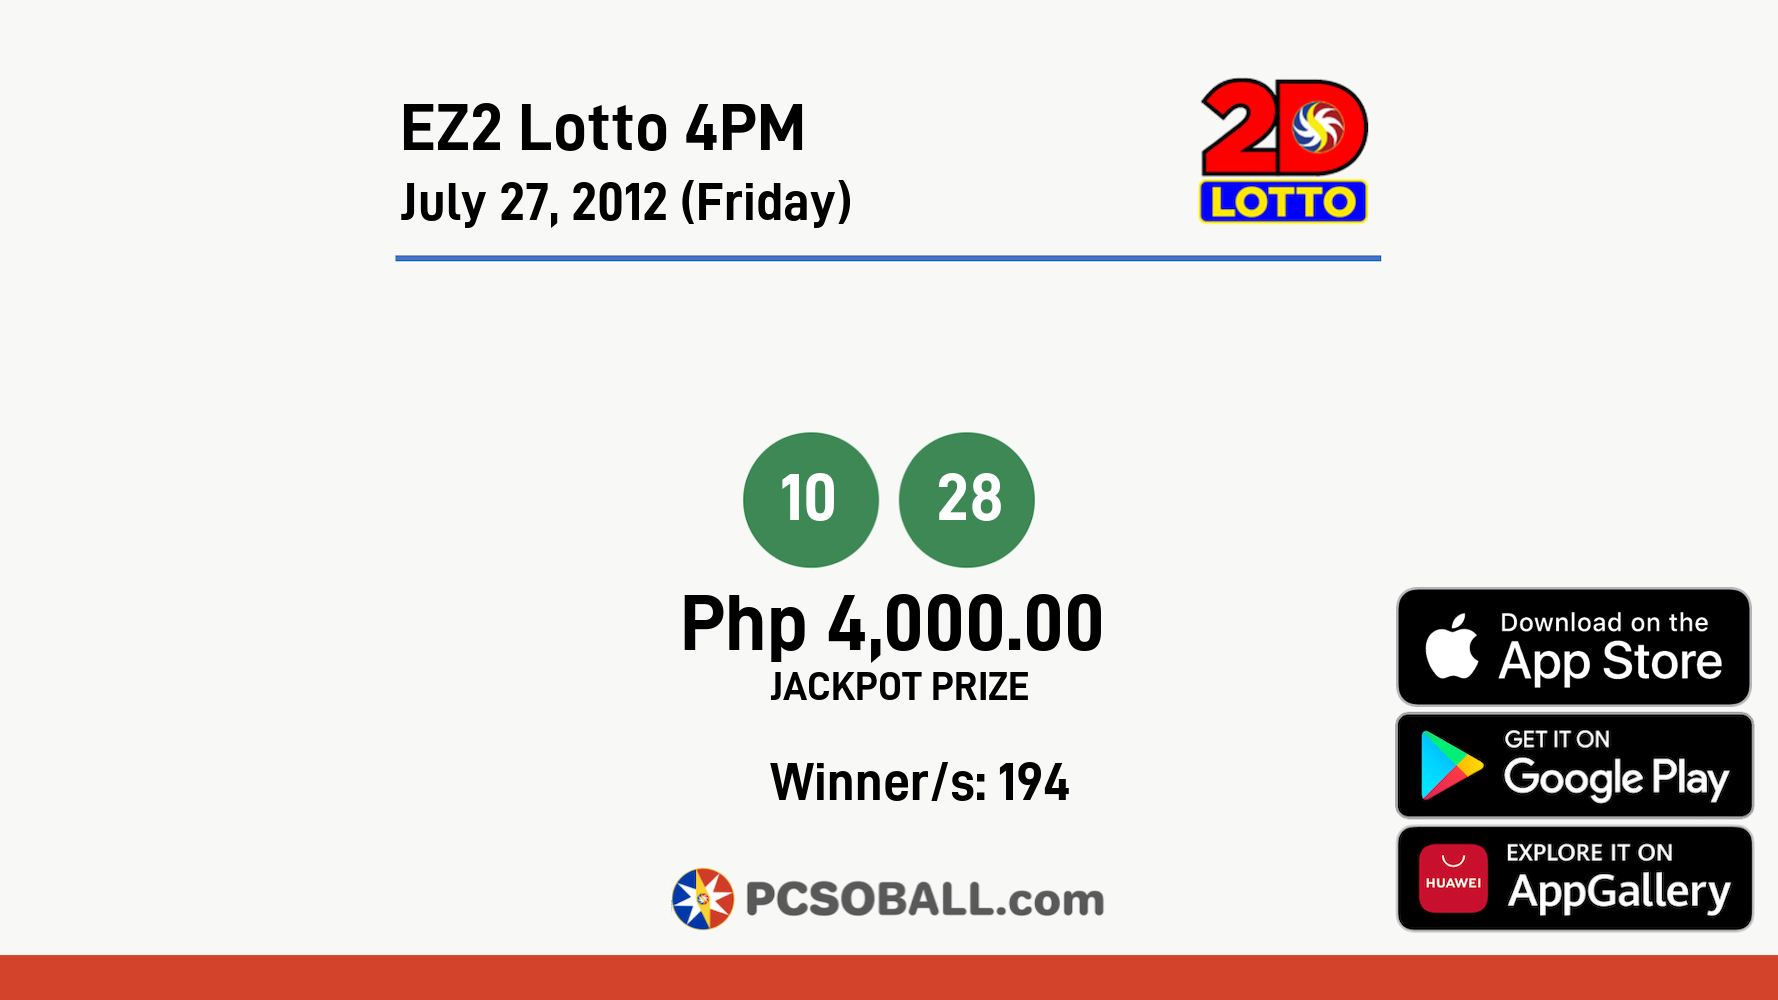 EZ2 Lotto 4PM July 27, 2012 (Friday) Result